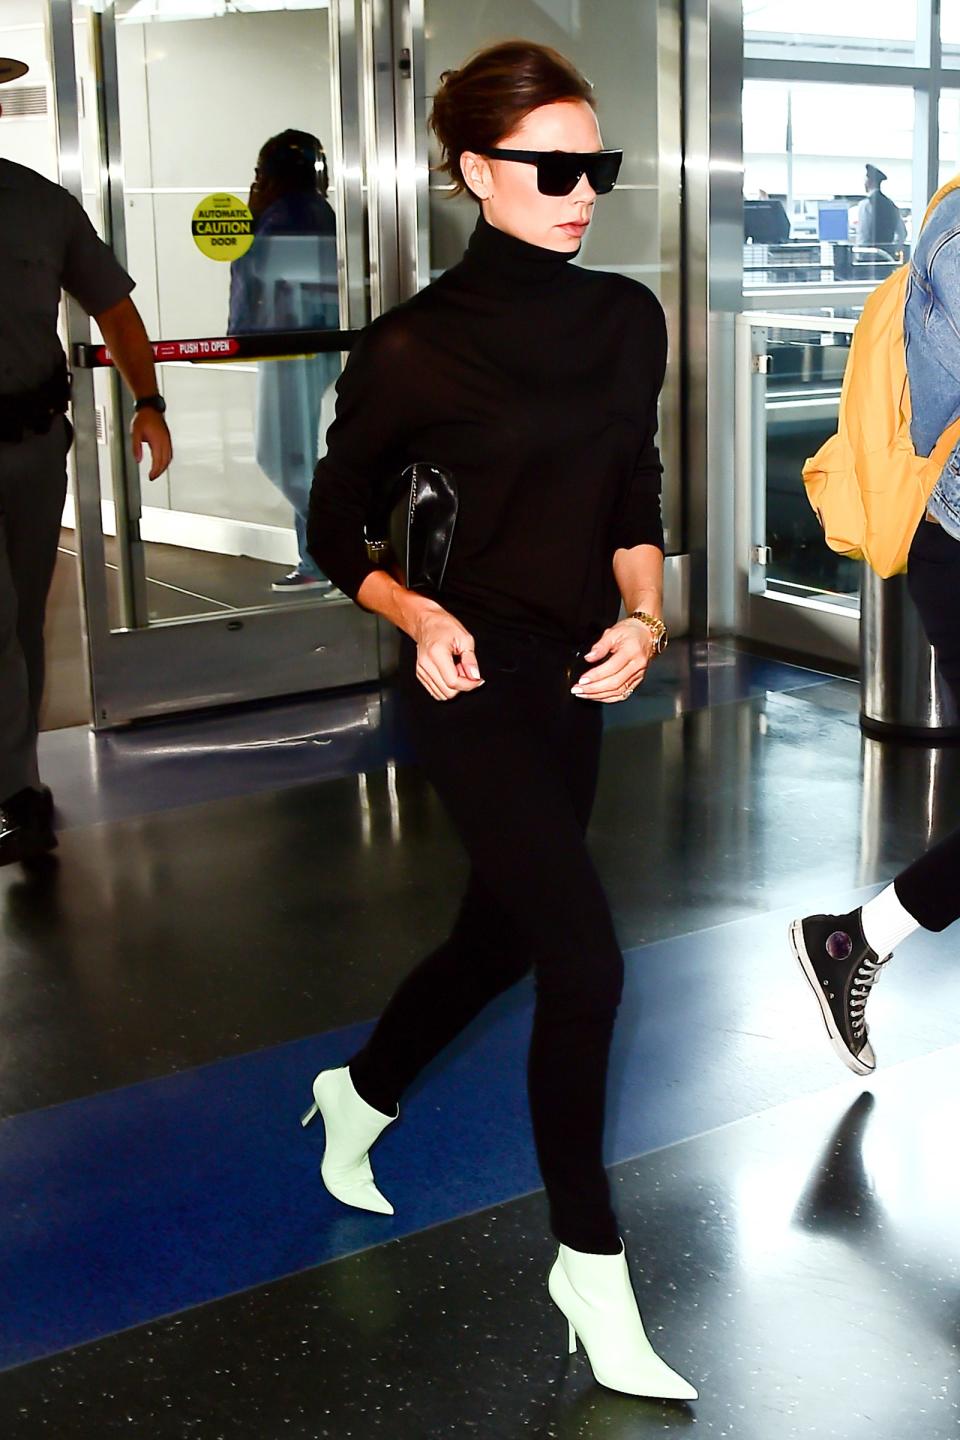 The Beckham way to hit the airport: black frames, black separates, and flashy white boots.